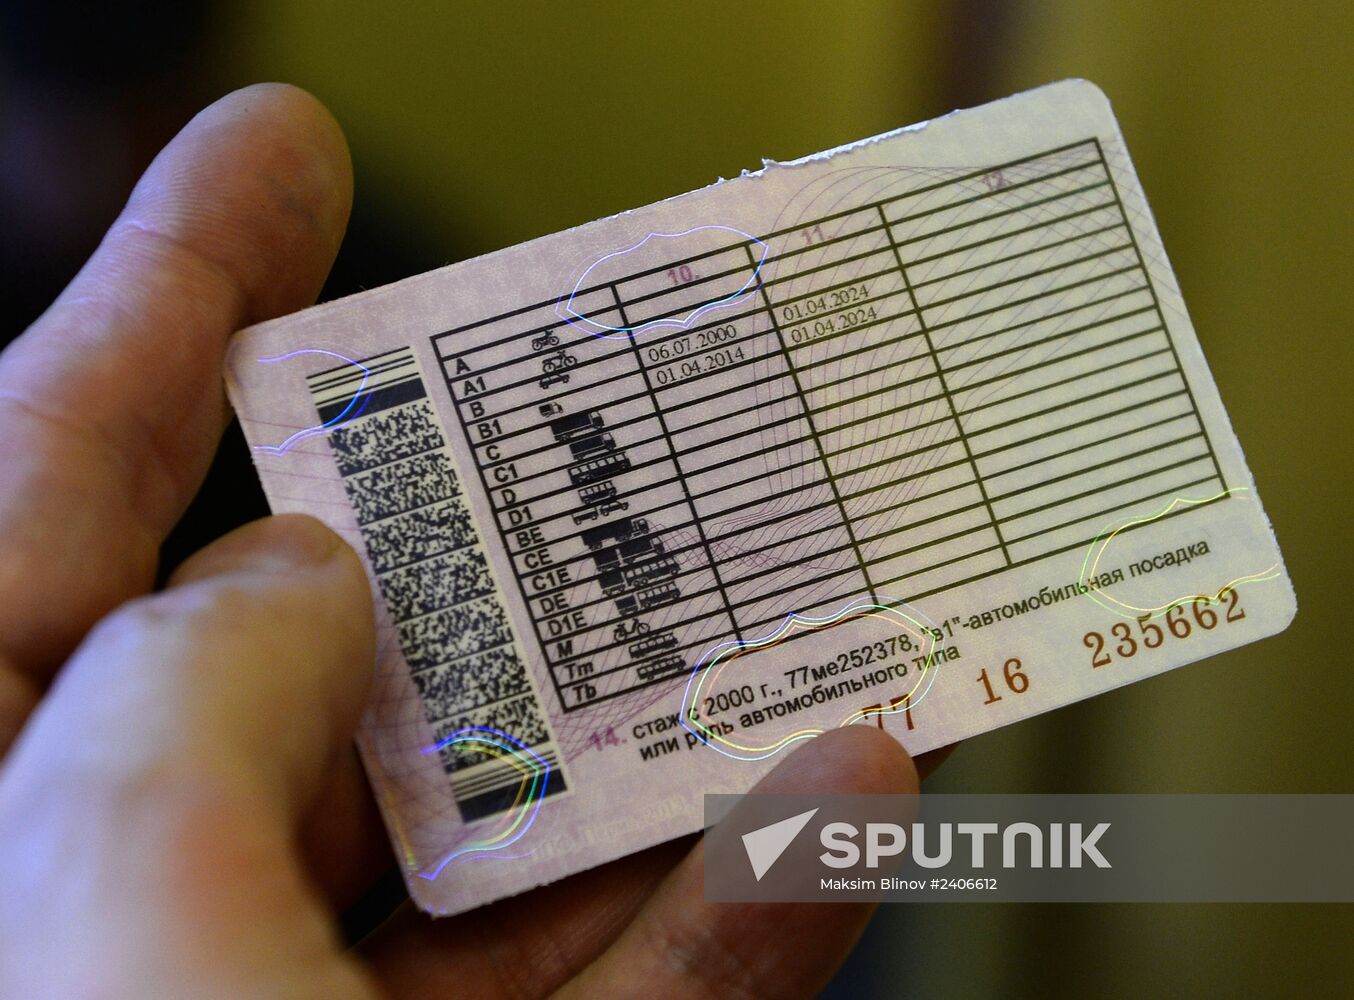 New style driver licenses are issued in Russia